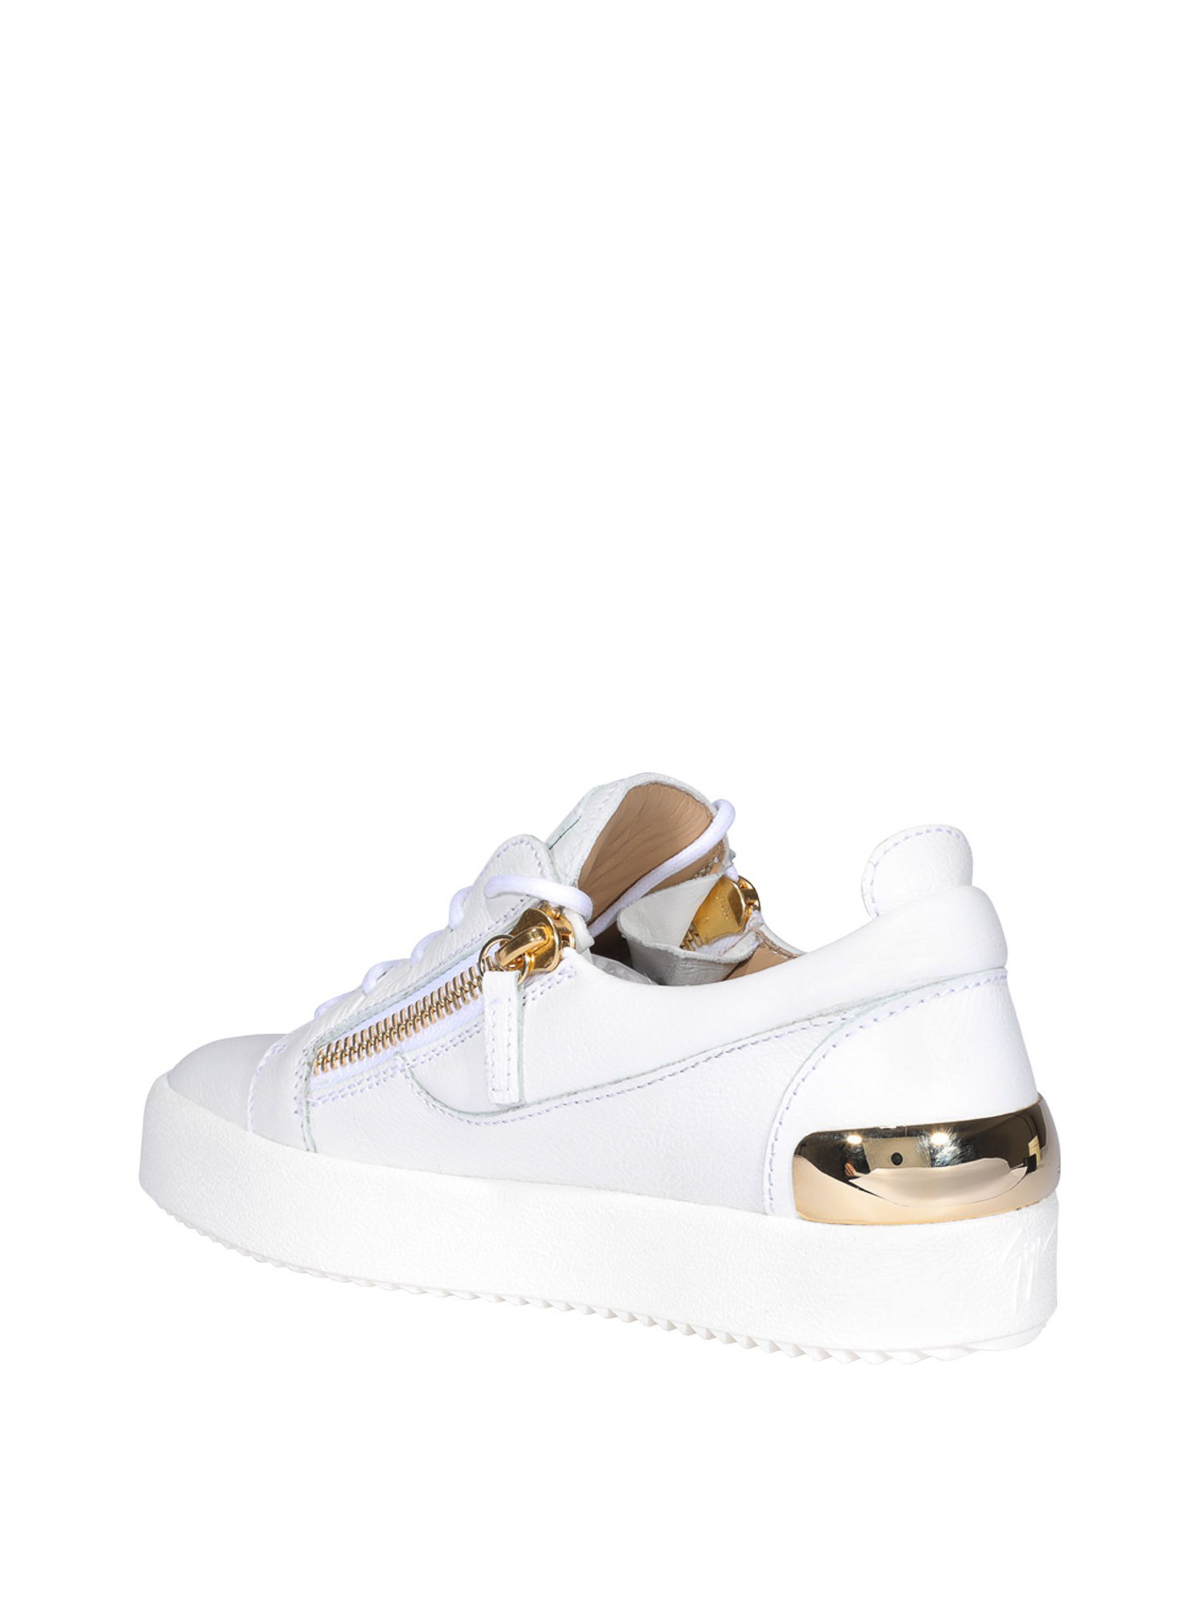 Forsvinde Smidighed Tredive Trainers Giuseppe Zanotti - Gail Steel leather sneakers - RW90051006